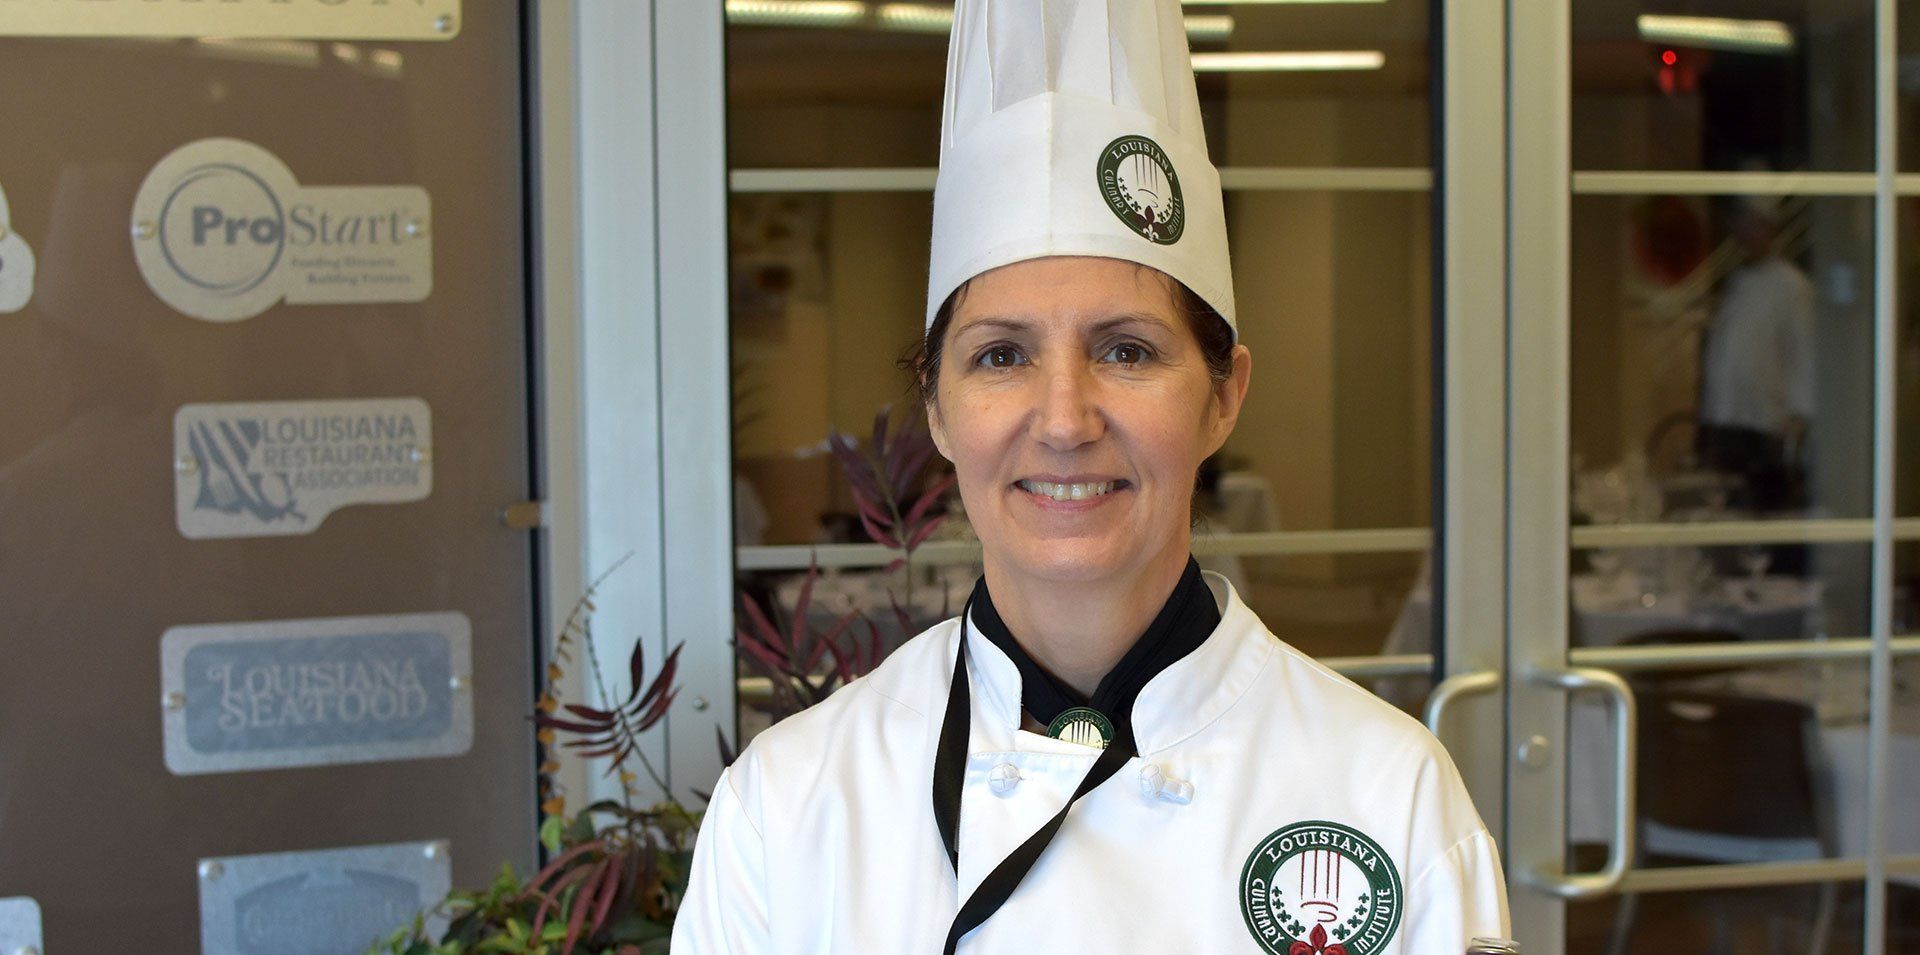 Chef instructor at Louisiana Culinary Institute